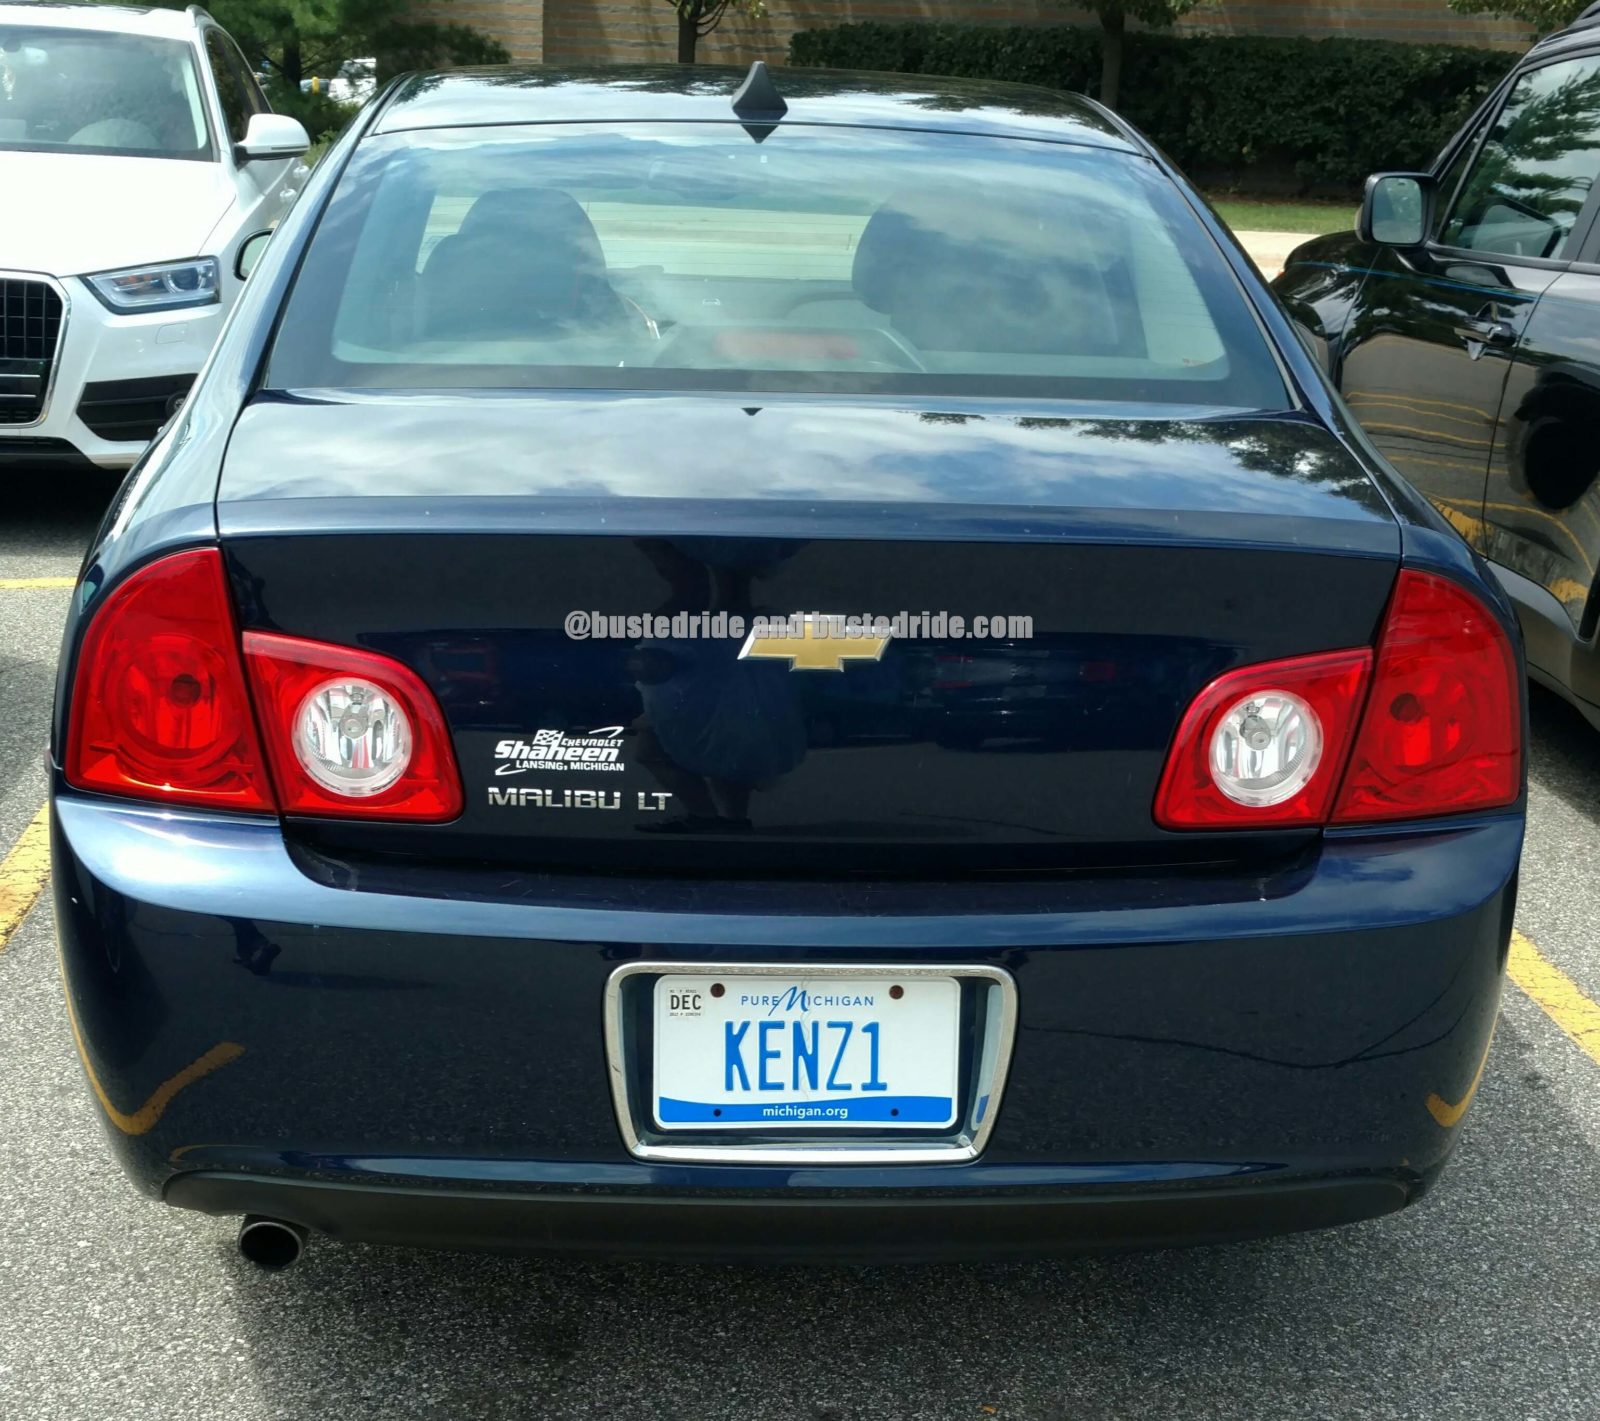 KENZ1 - Vanity License Plate by Busted Ride